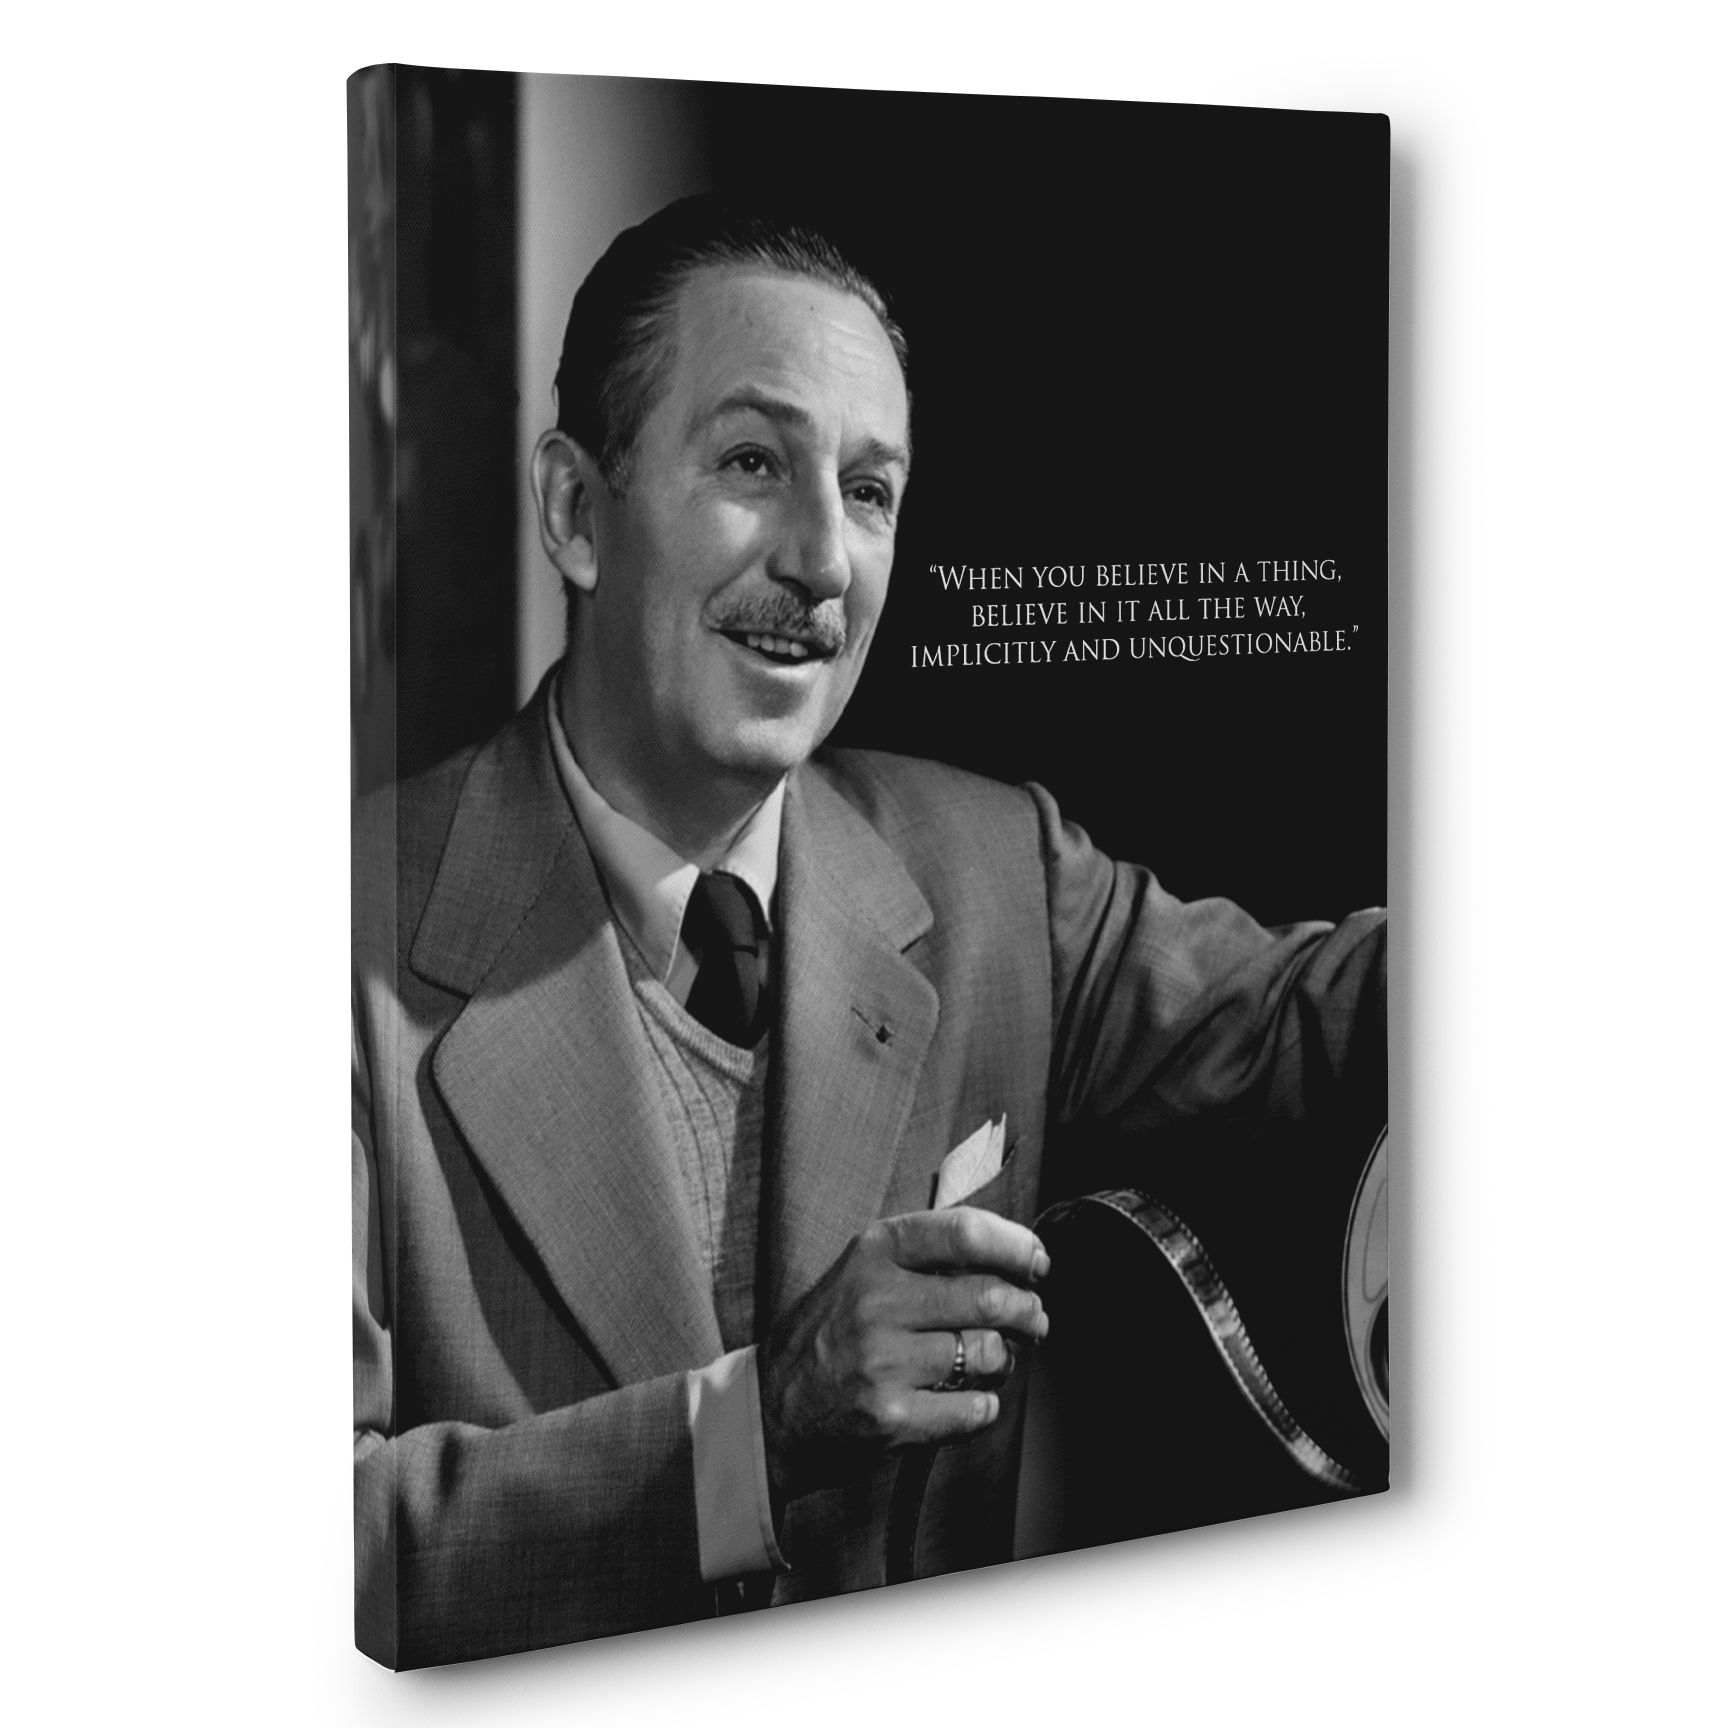 Buy Hand Crafted Believe Walt Disney Motivation Quote Canvas Wall Art, Made To Order From Paper Blast | Custommade.com